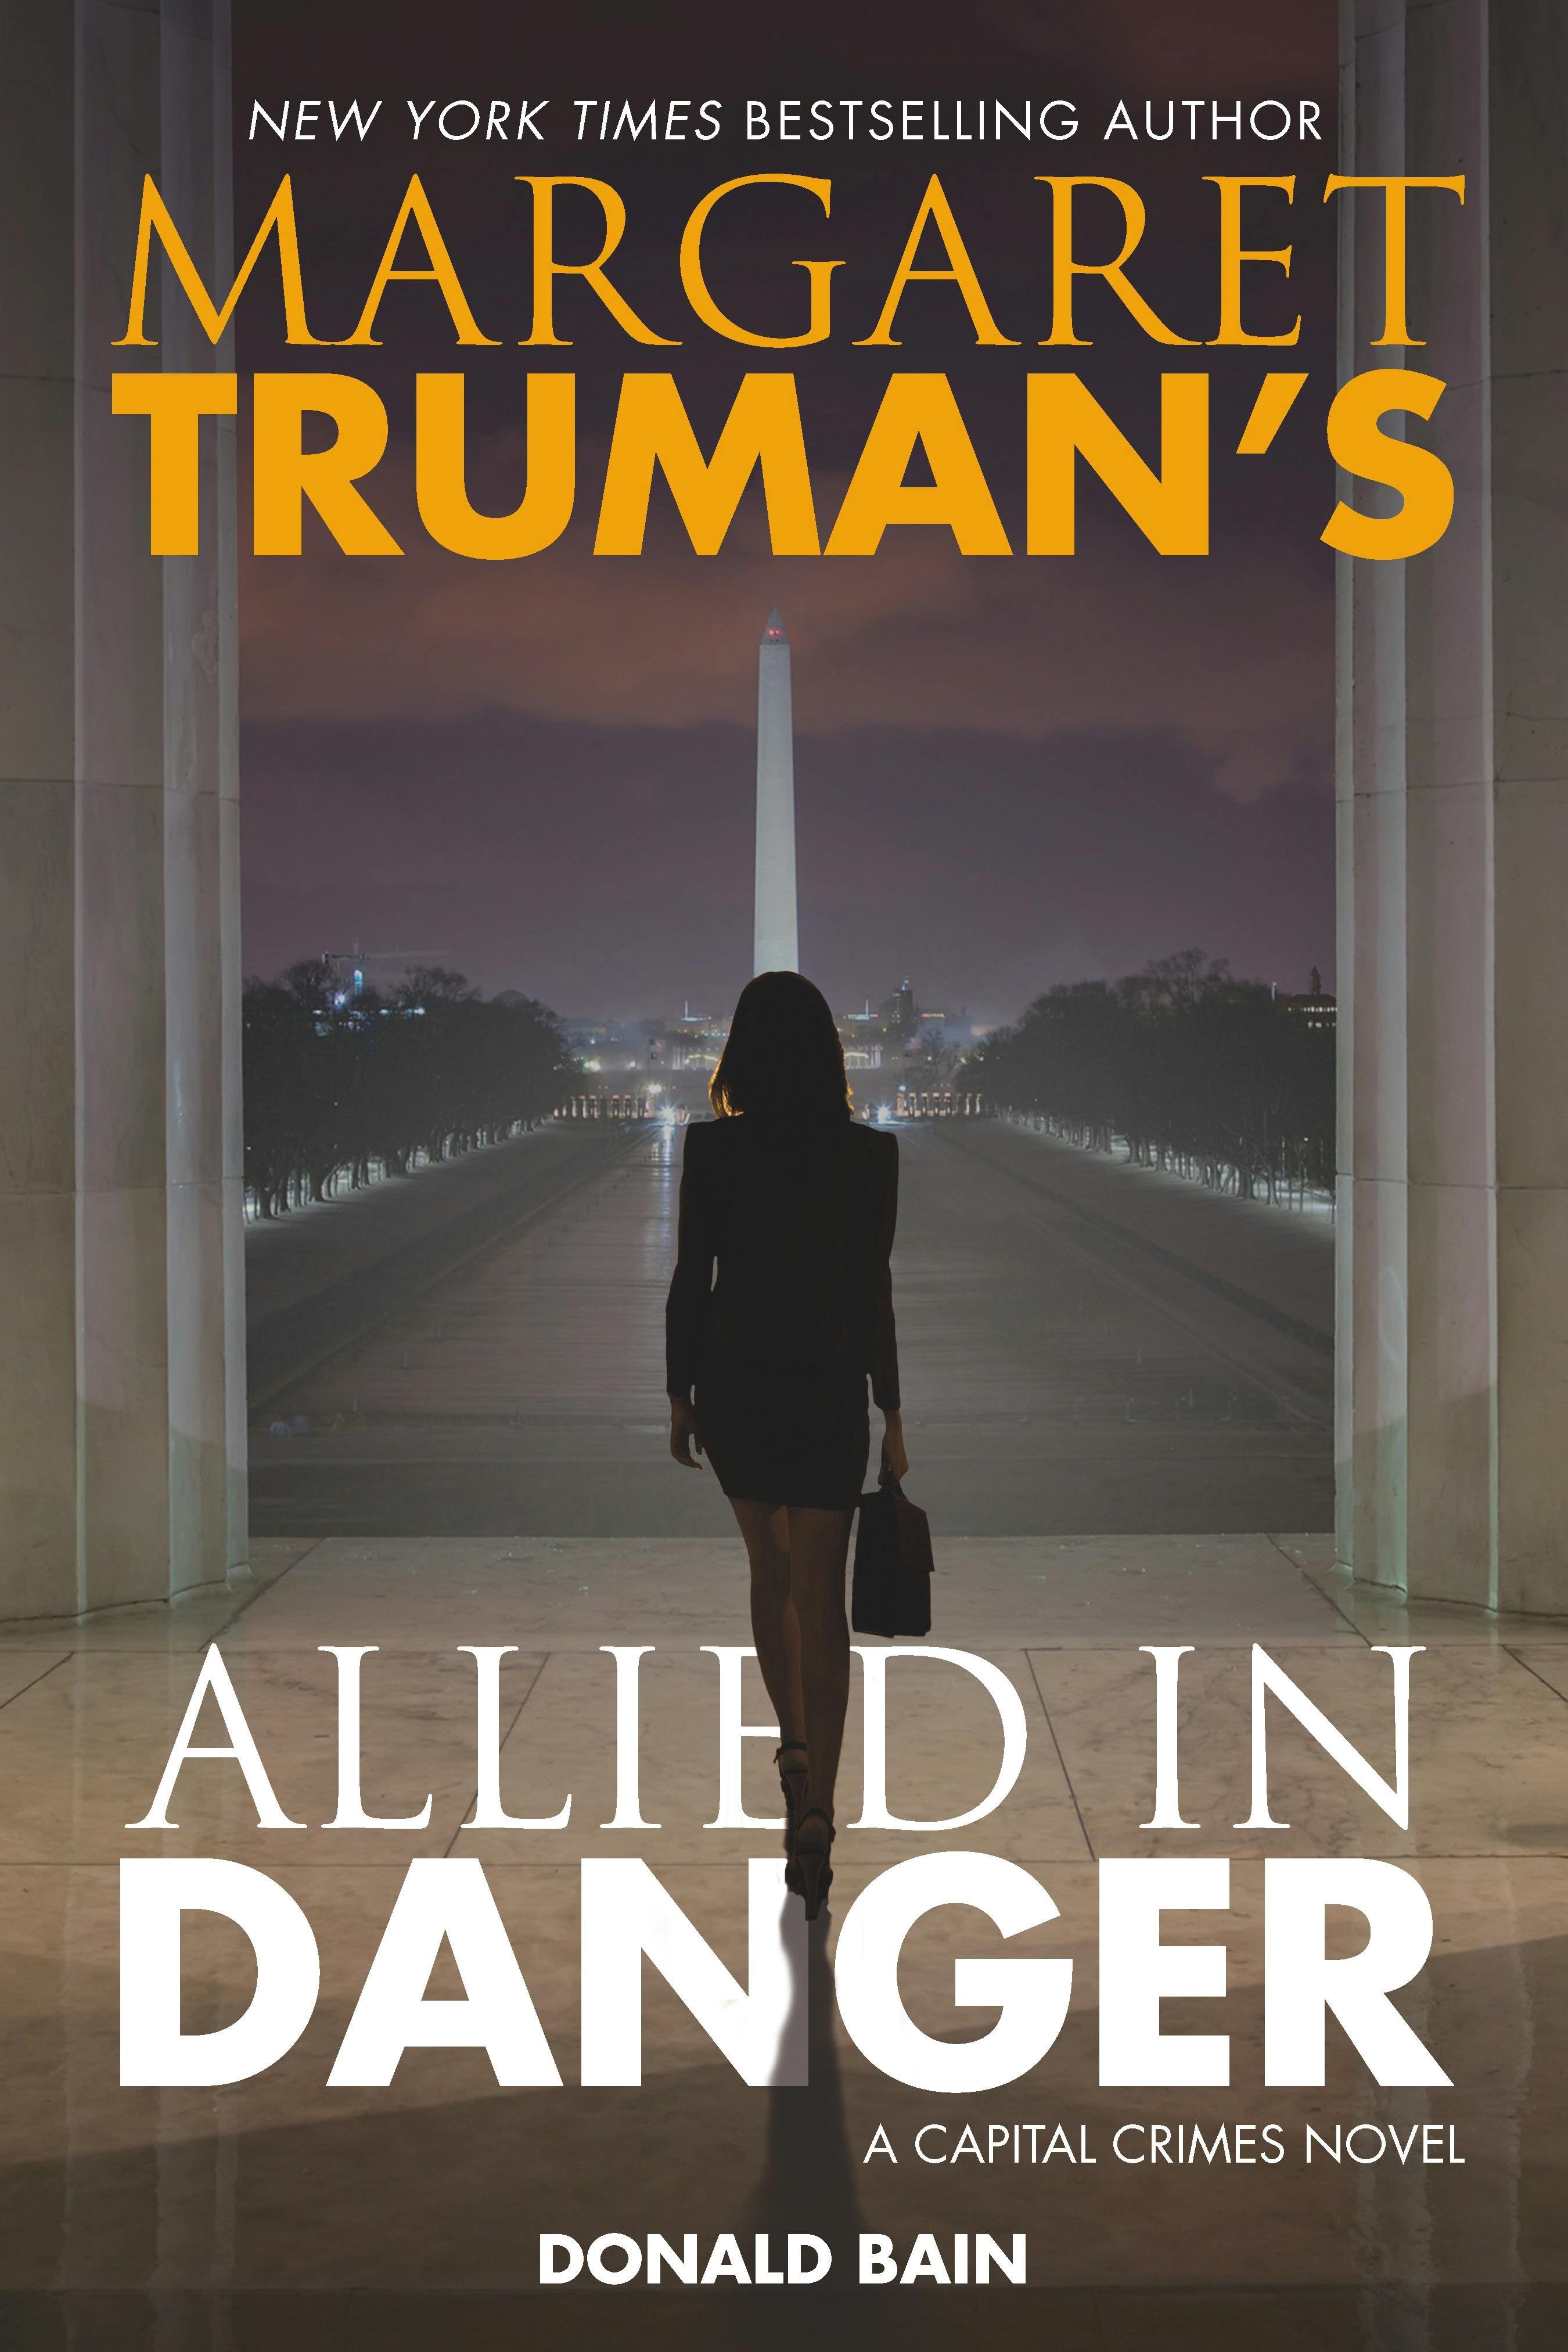 Cover for the book titled as: Margaret Truman's Allied in Danger